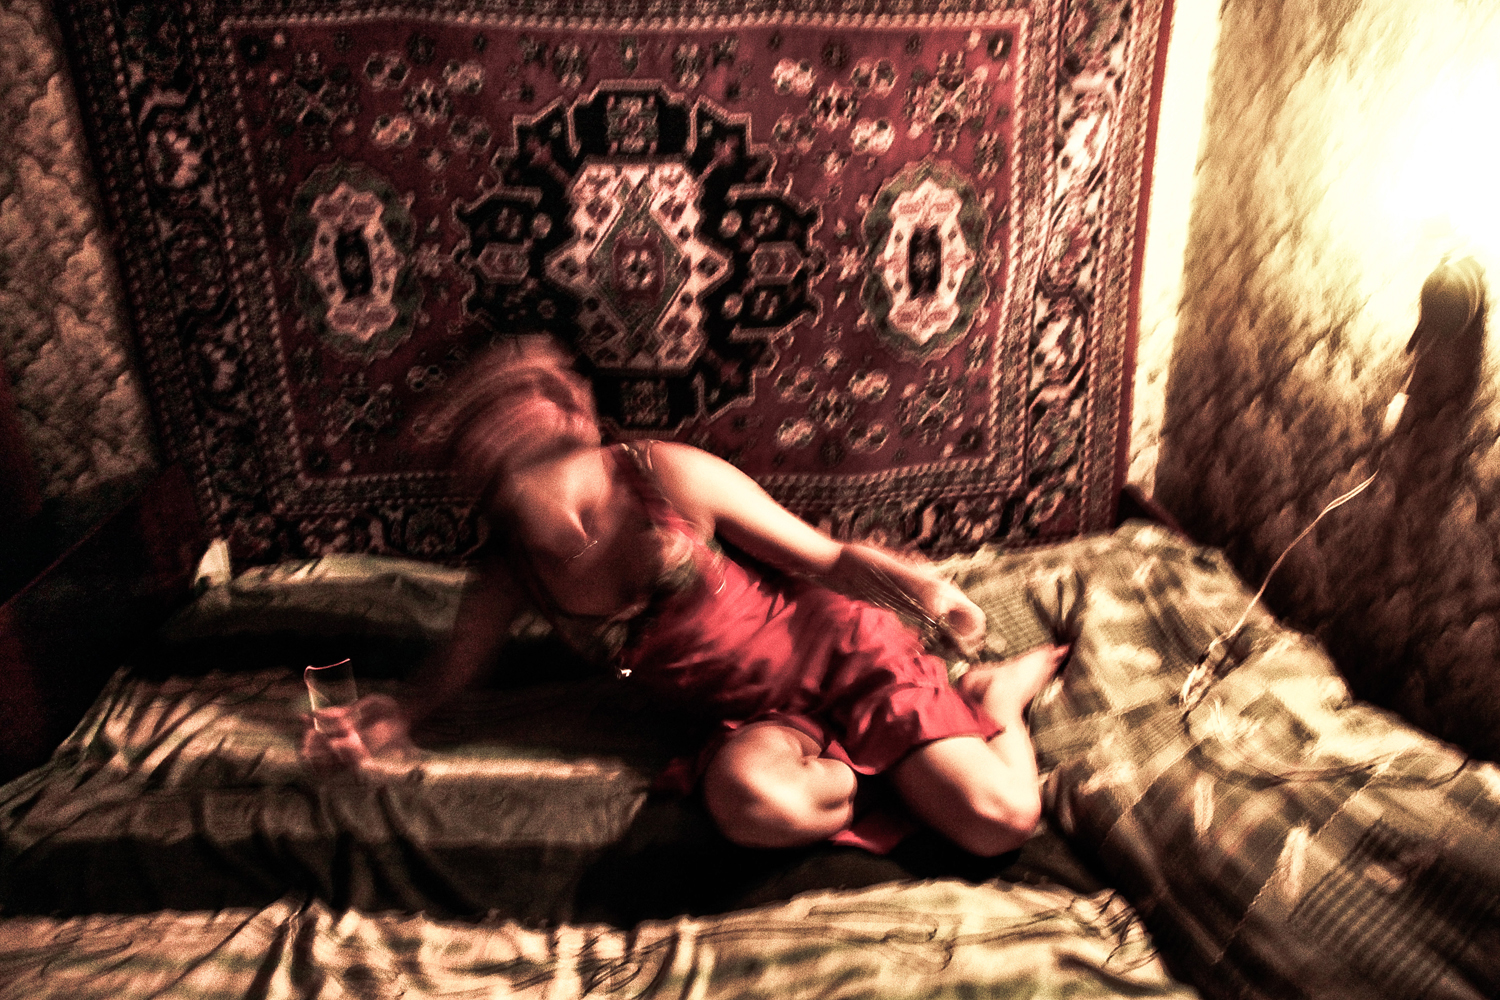 A woman believed to be a prostitute poses in her bed.